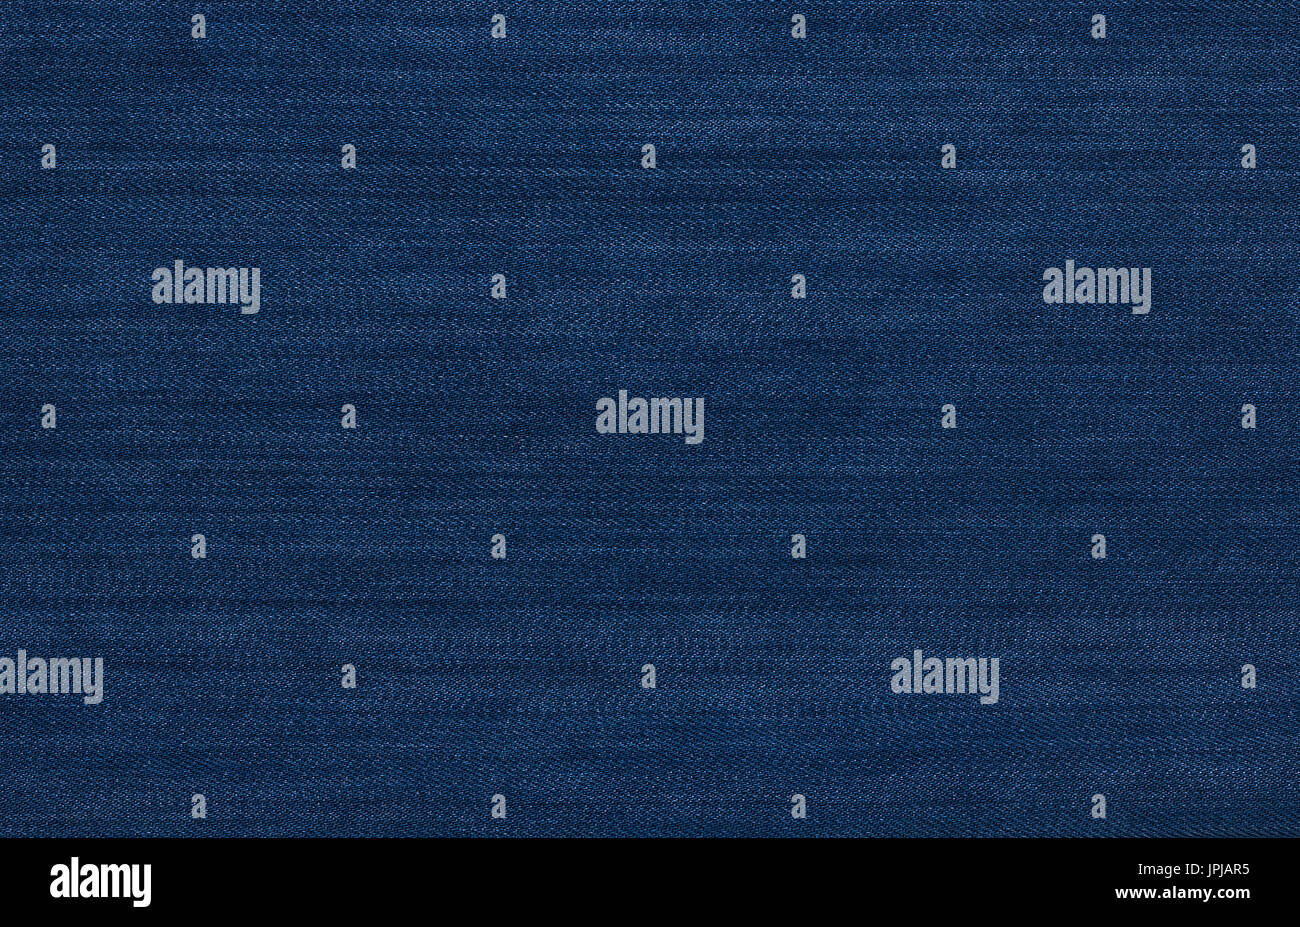 Blue background, denim jeans background. Jeans texture, fabric. Stock Photo